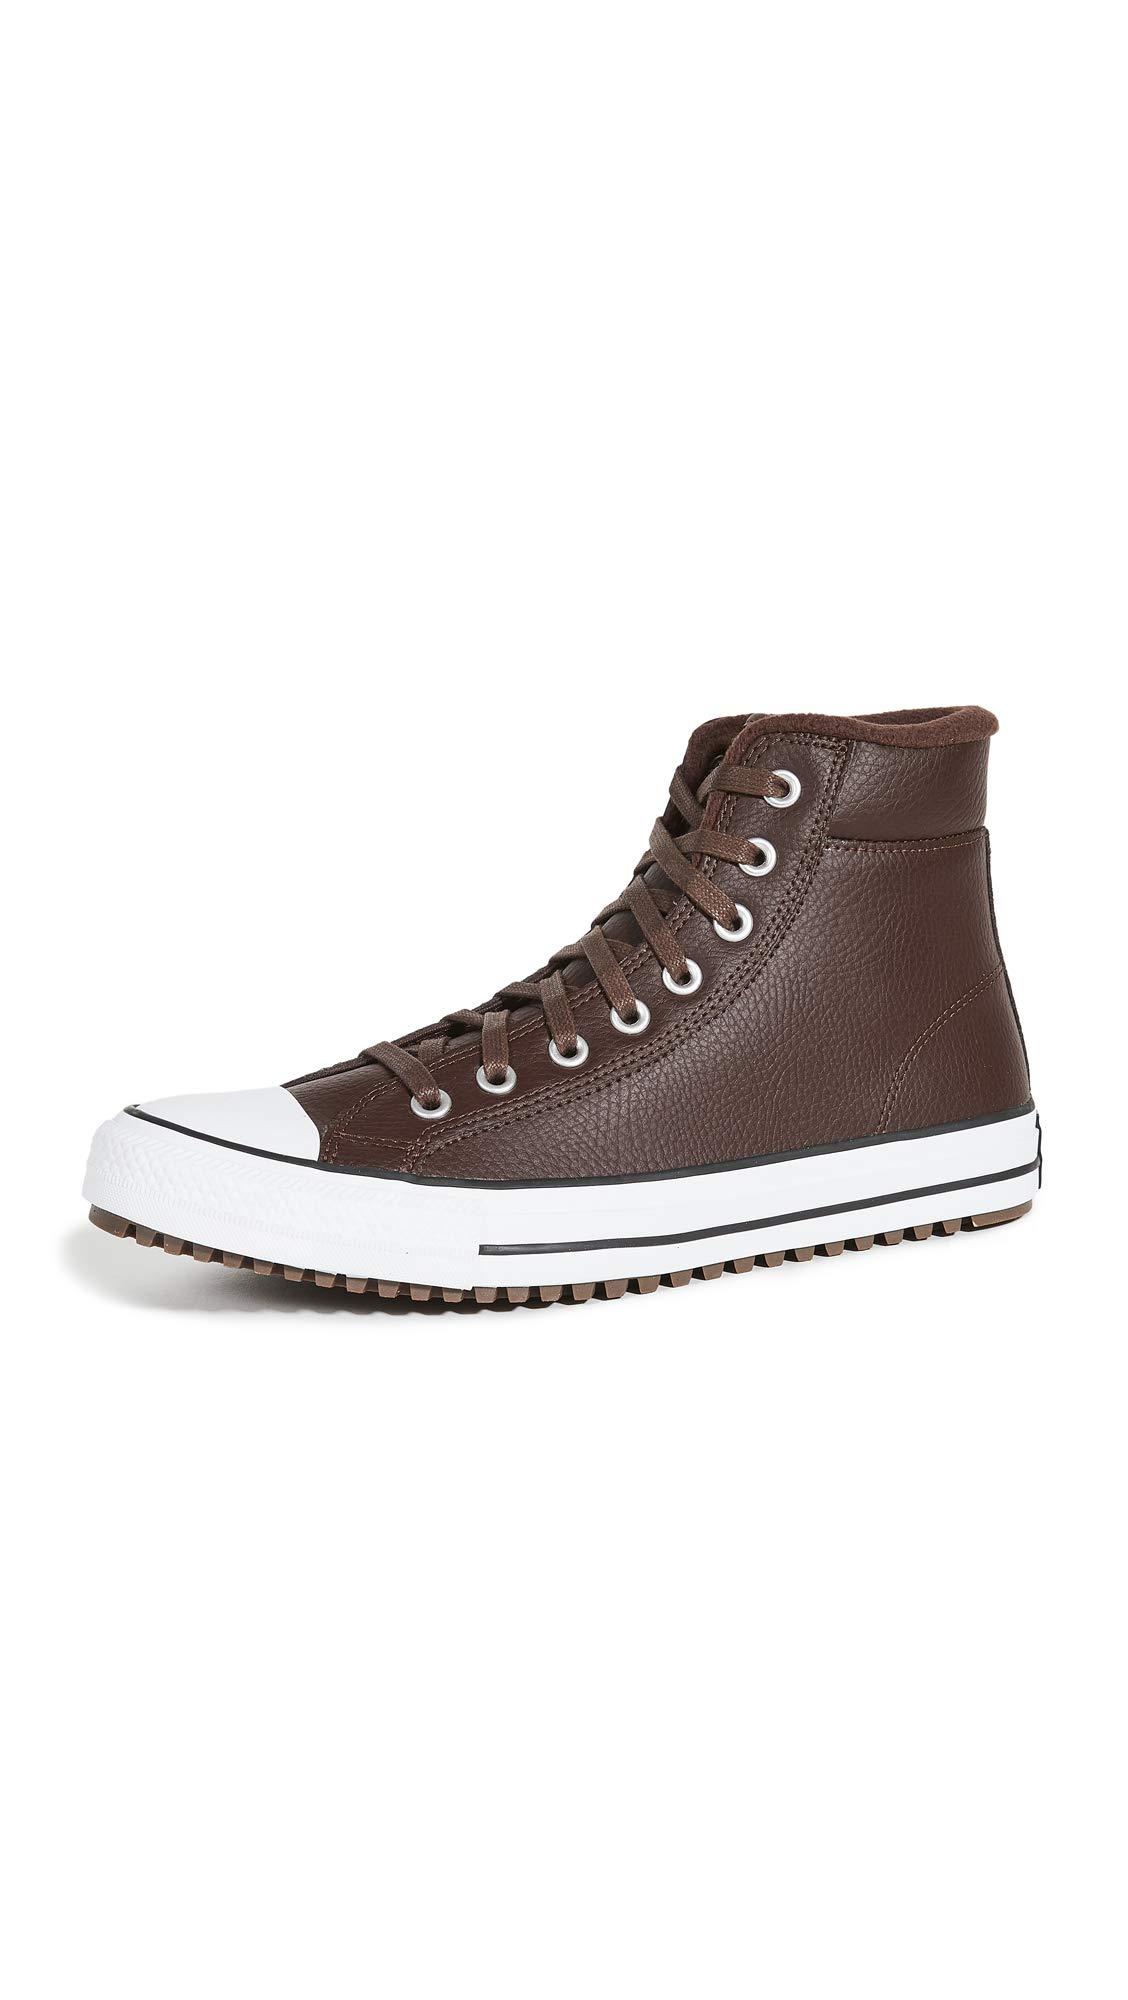 converse dainty boots